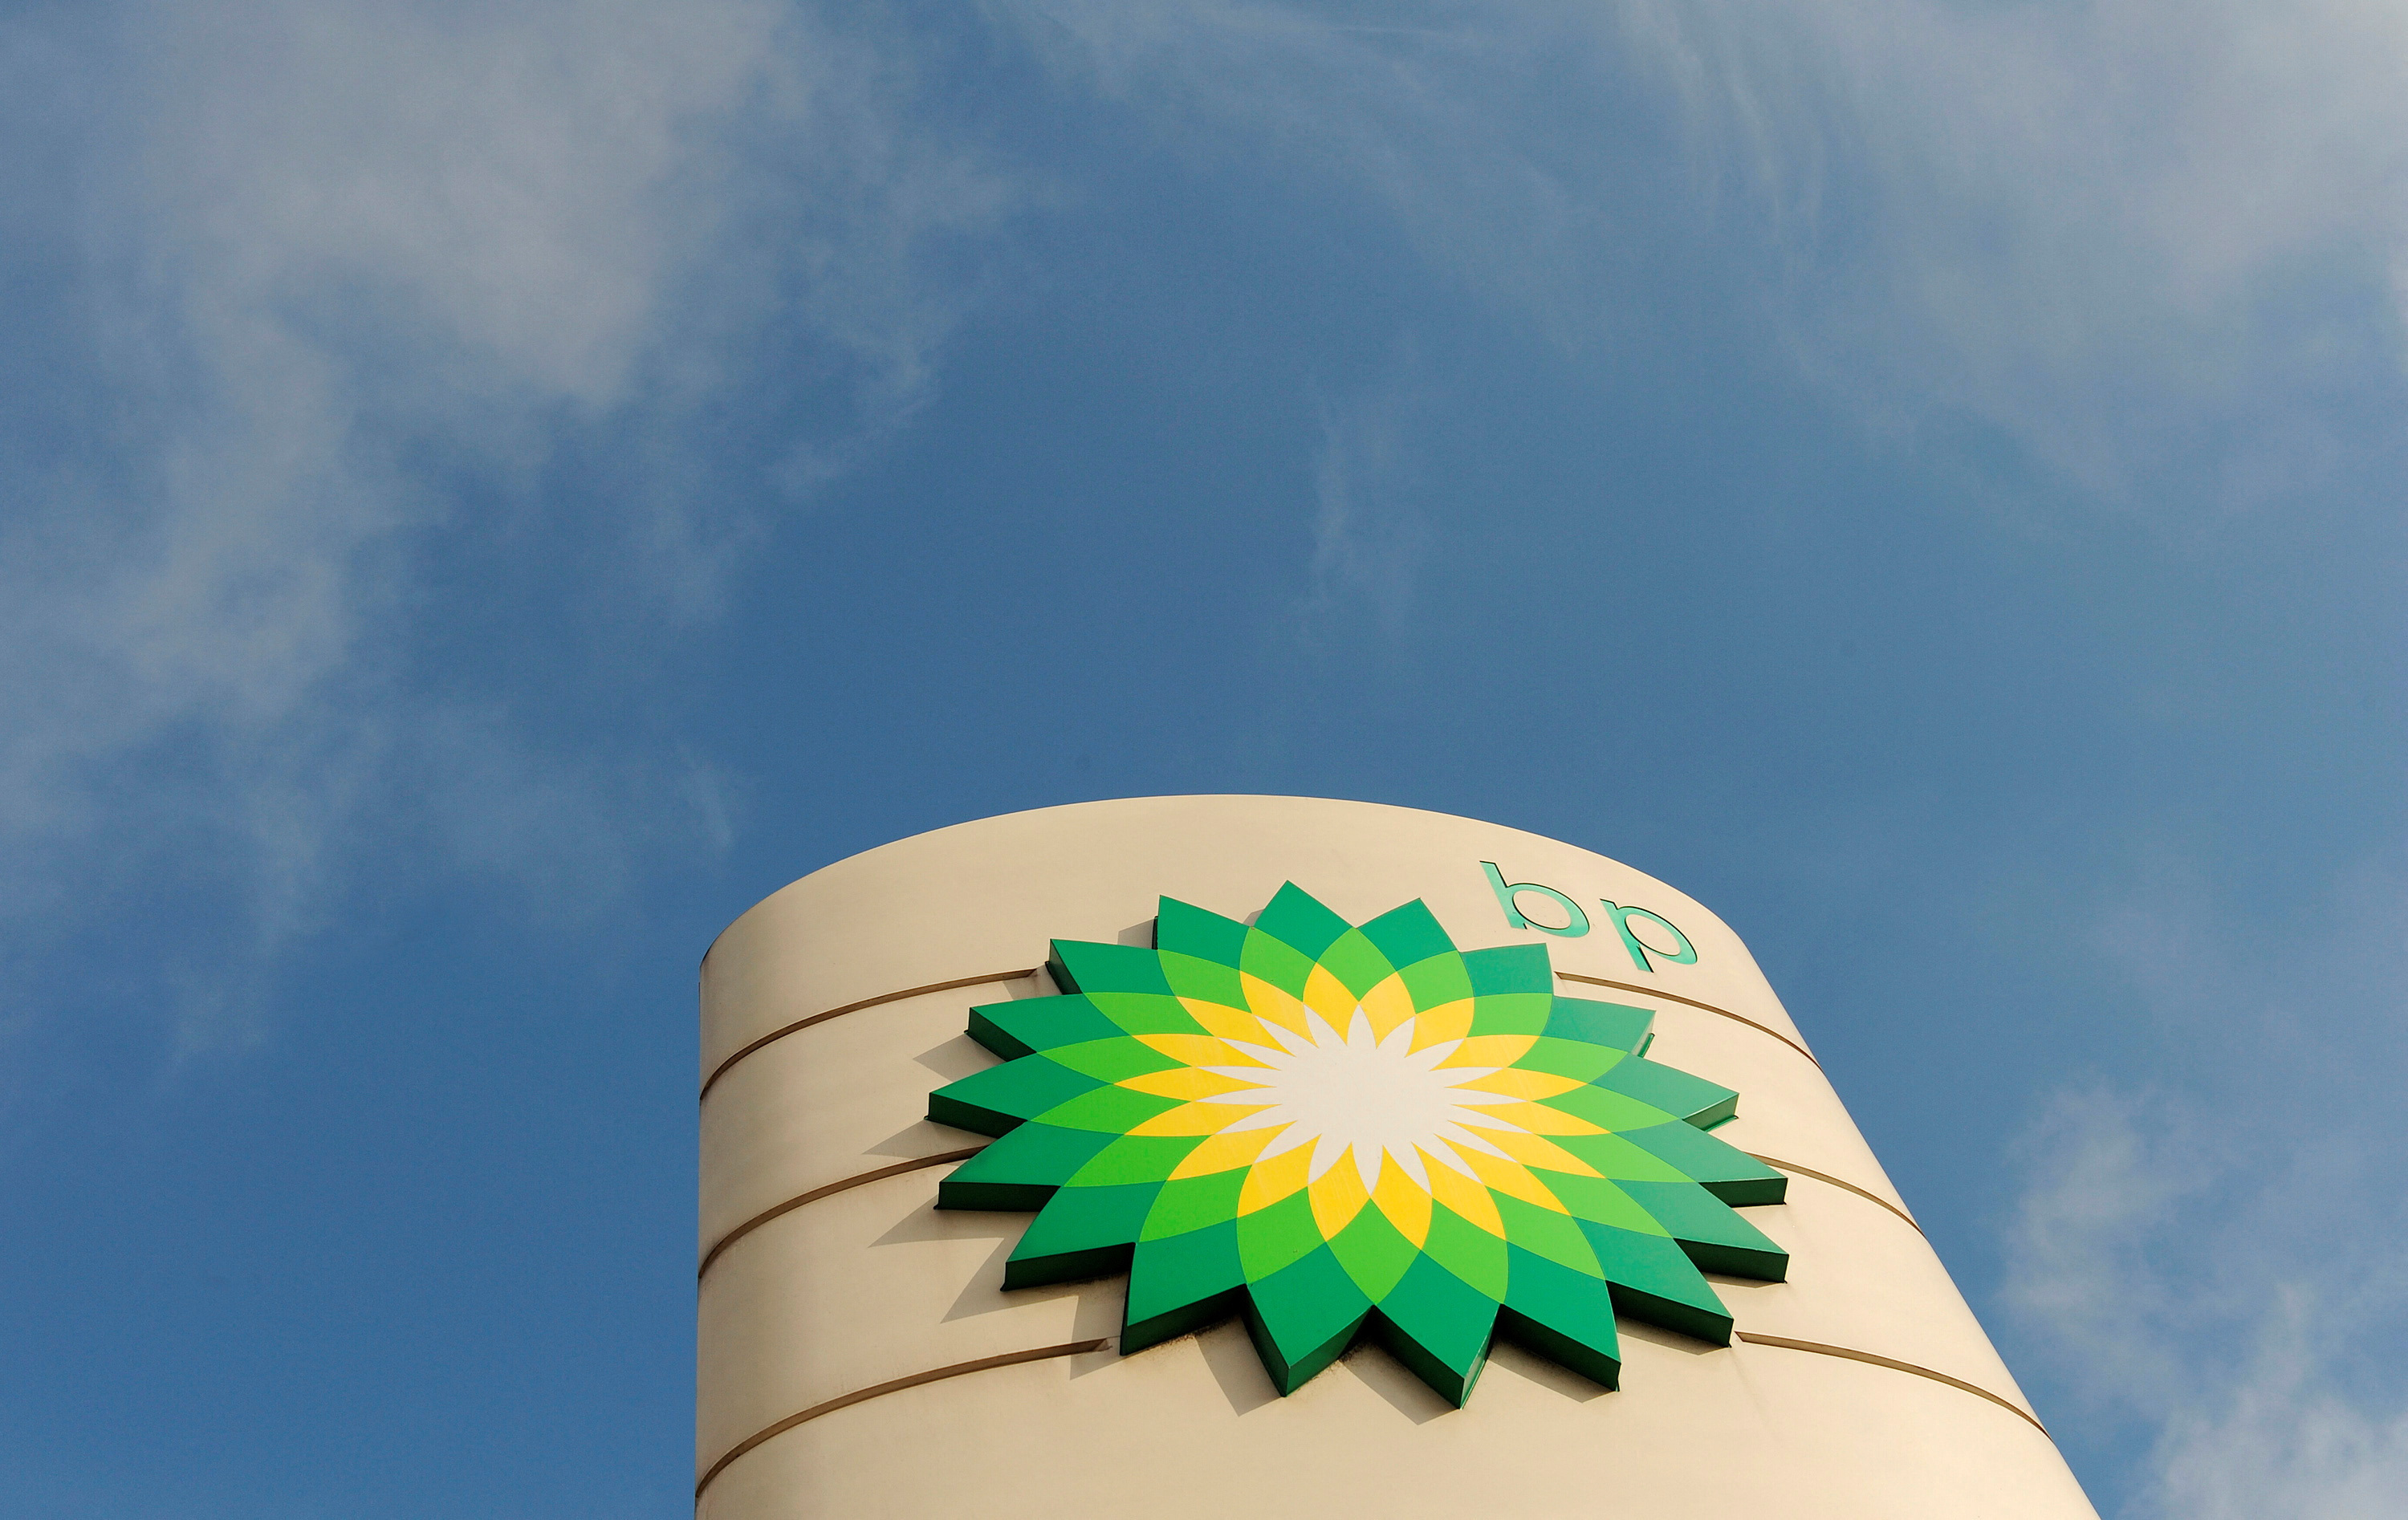 A logo on a British Petroleum petrol station is seen in London